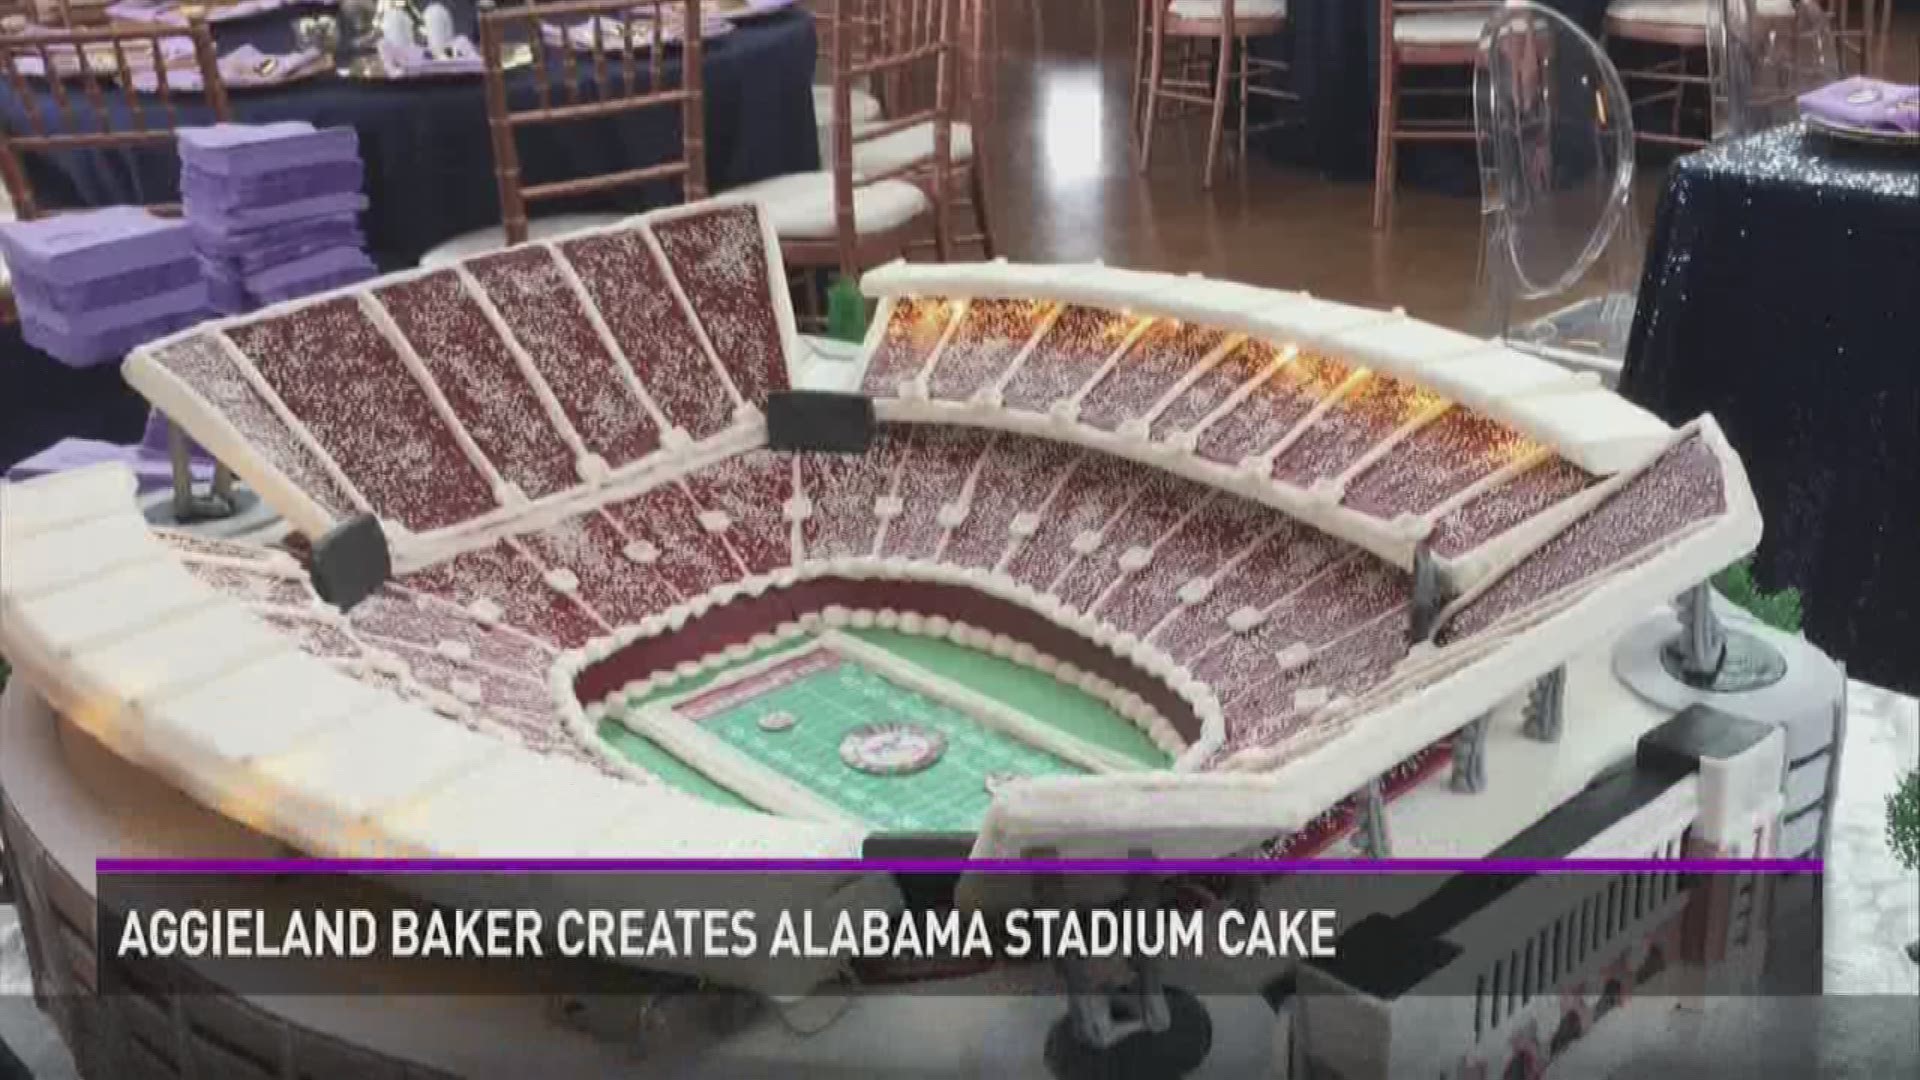 A University of Alabama fan hires a local baker to make a stadium cake for her wedding.